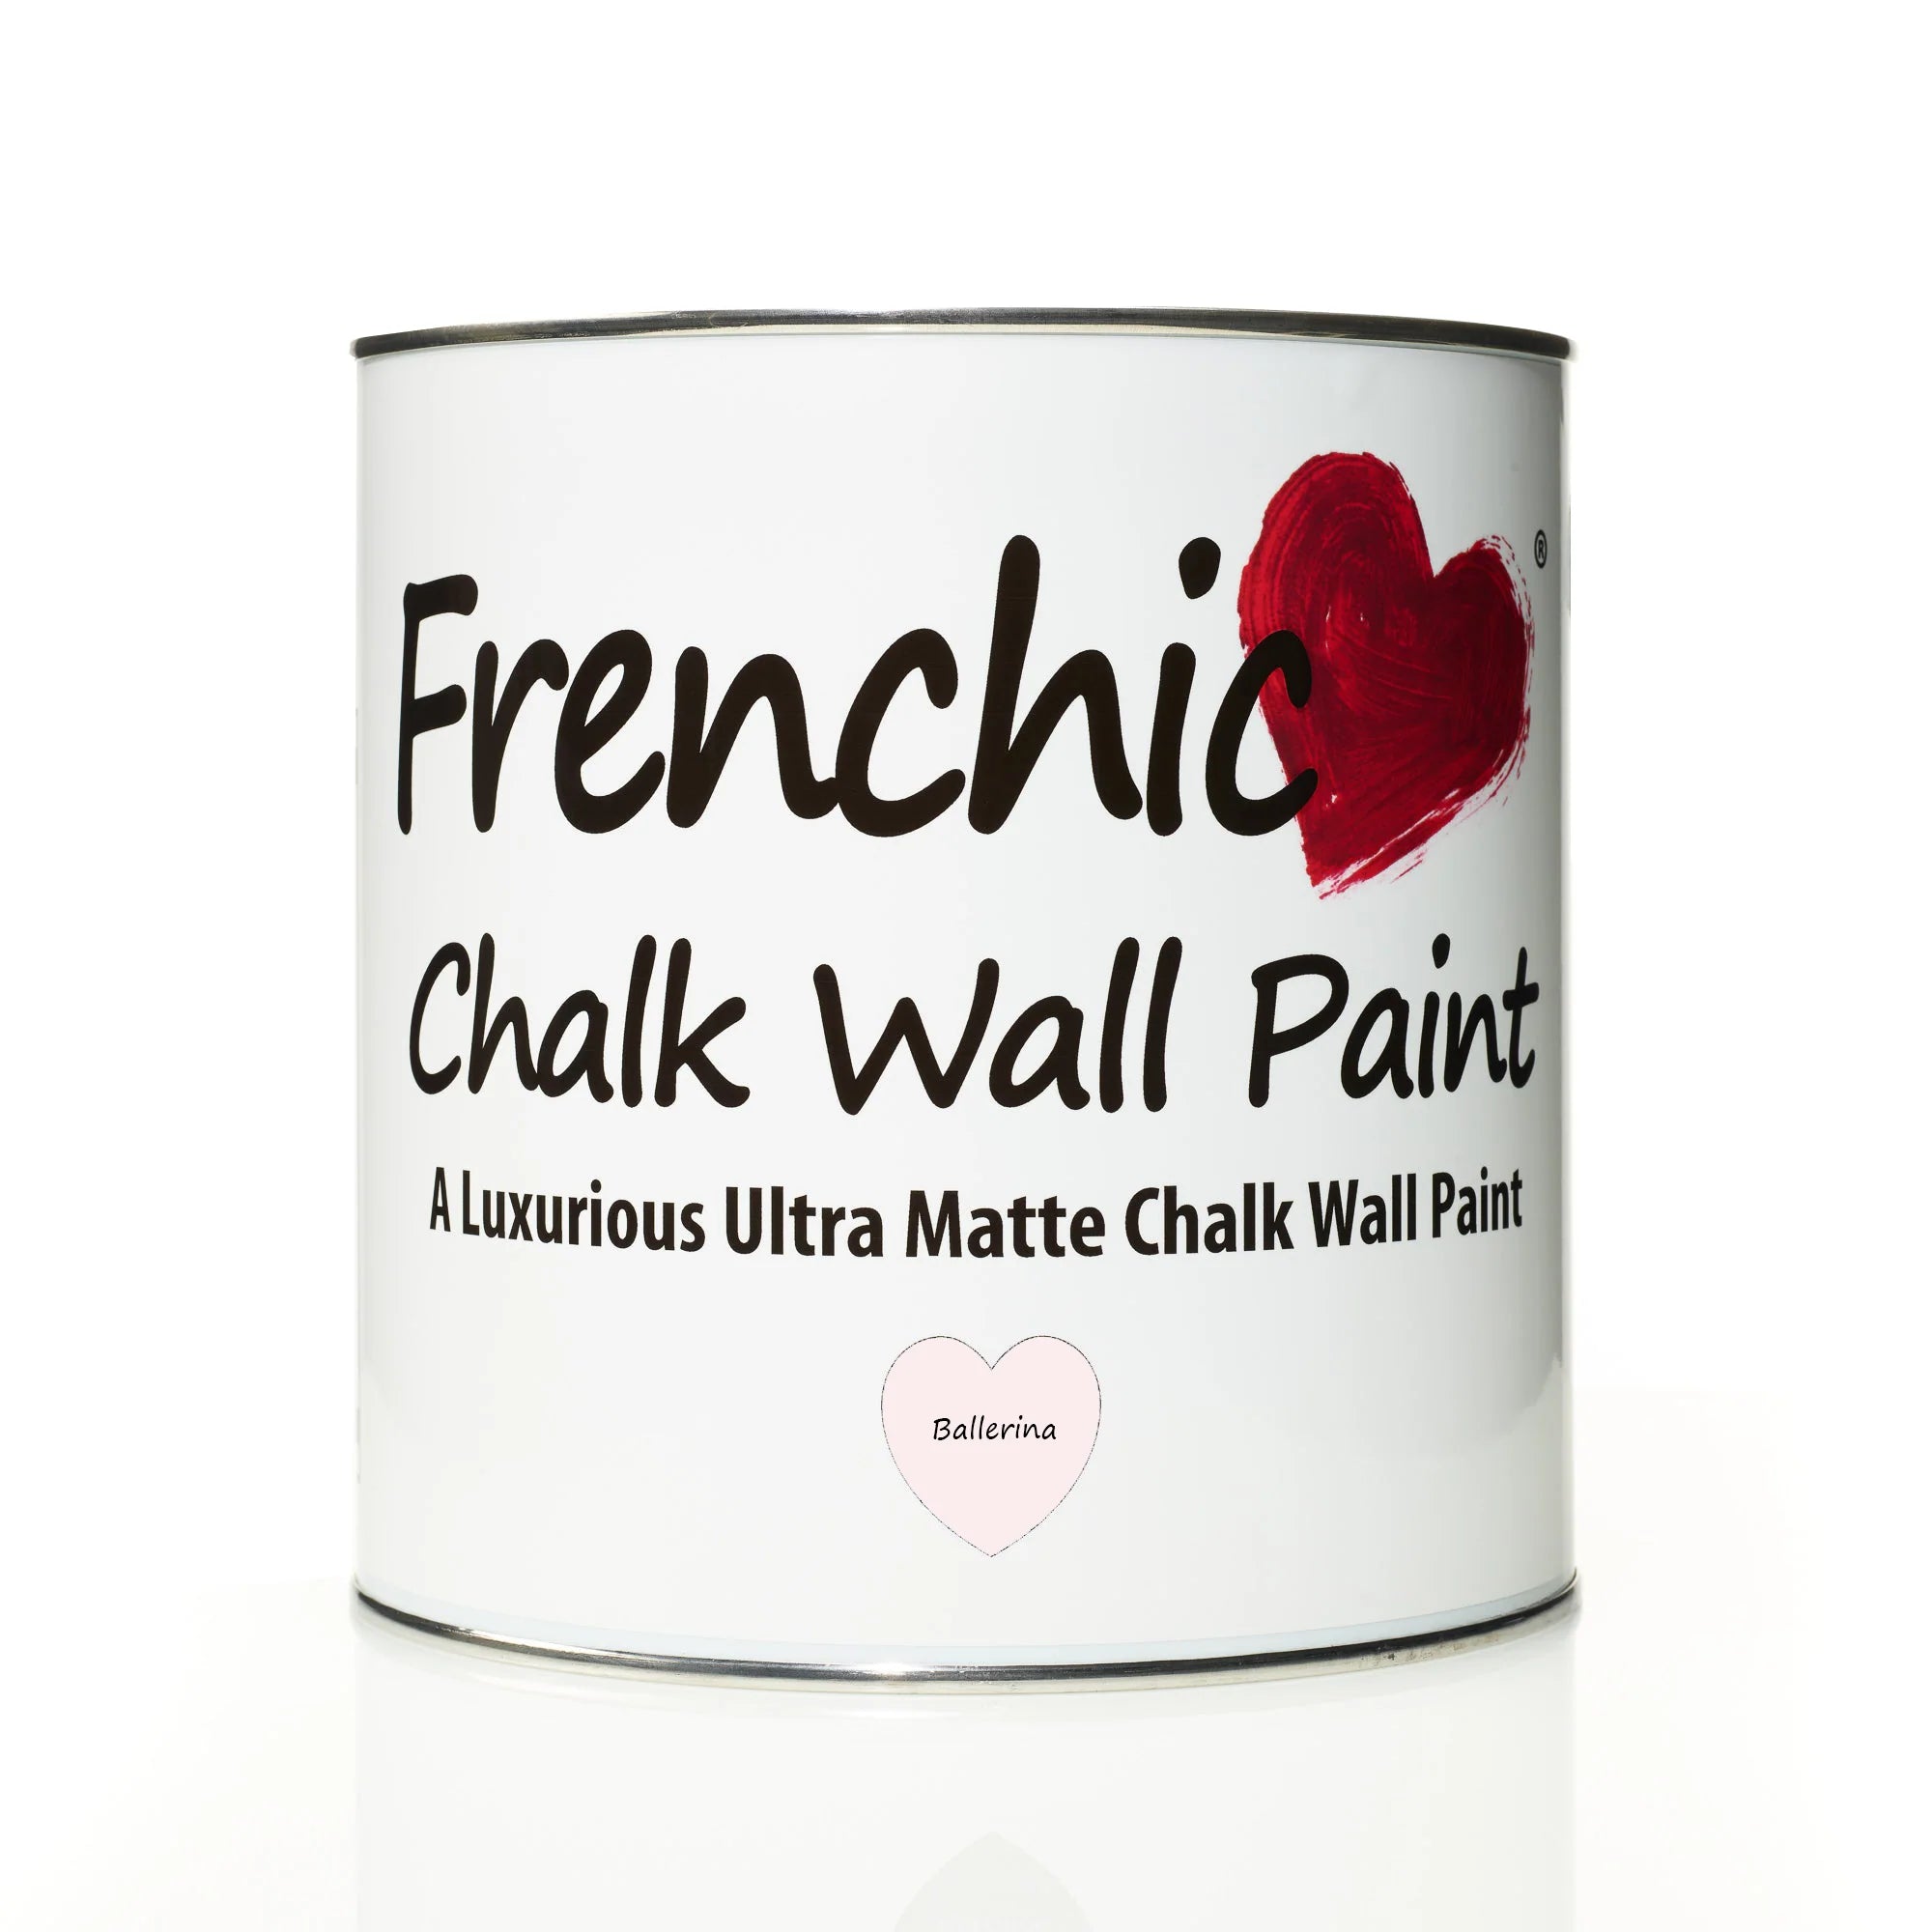 Frenchic Paint Ballerina Wall Paint 2.5L Frenchic Paint Chalk Wall Paint Range by Weirs of Baggot Street Irelands Largest and most Trusted Stockist of Frenchic Paint. Shop online for Nationwide and Same Day Dublin Delivery